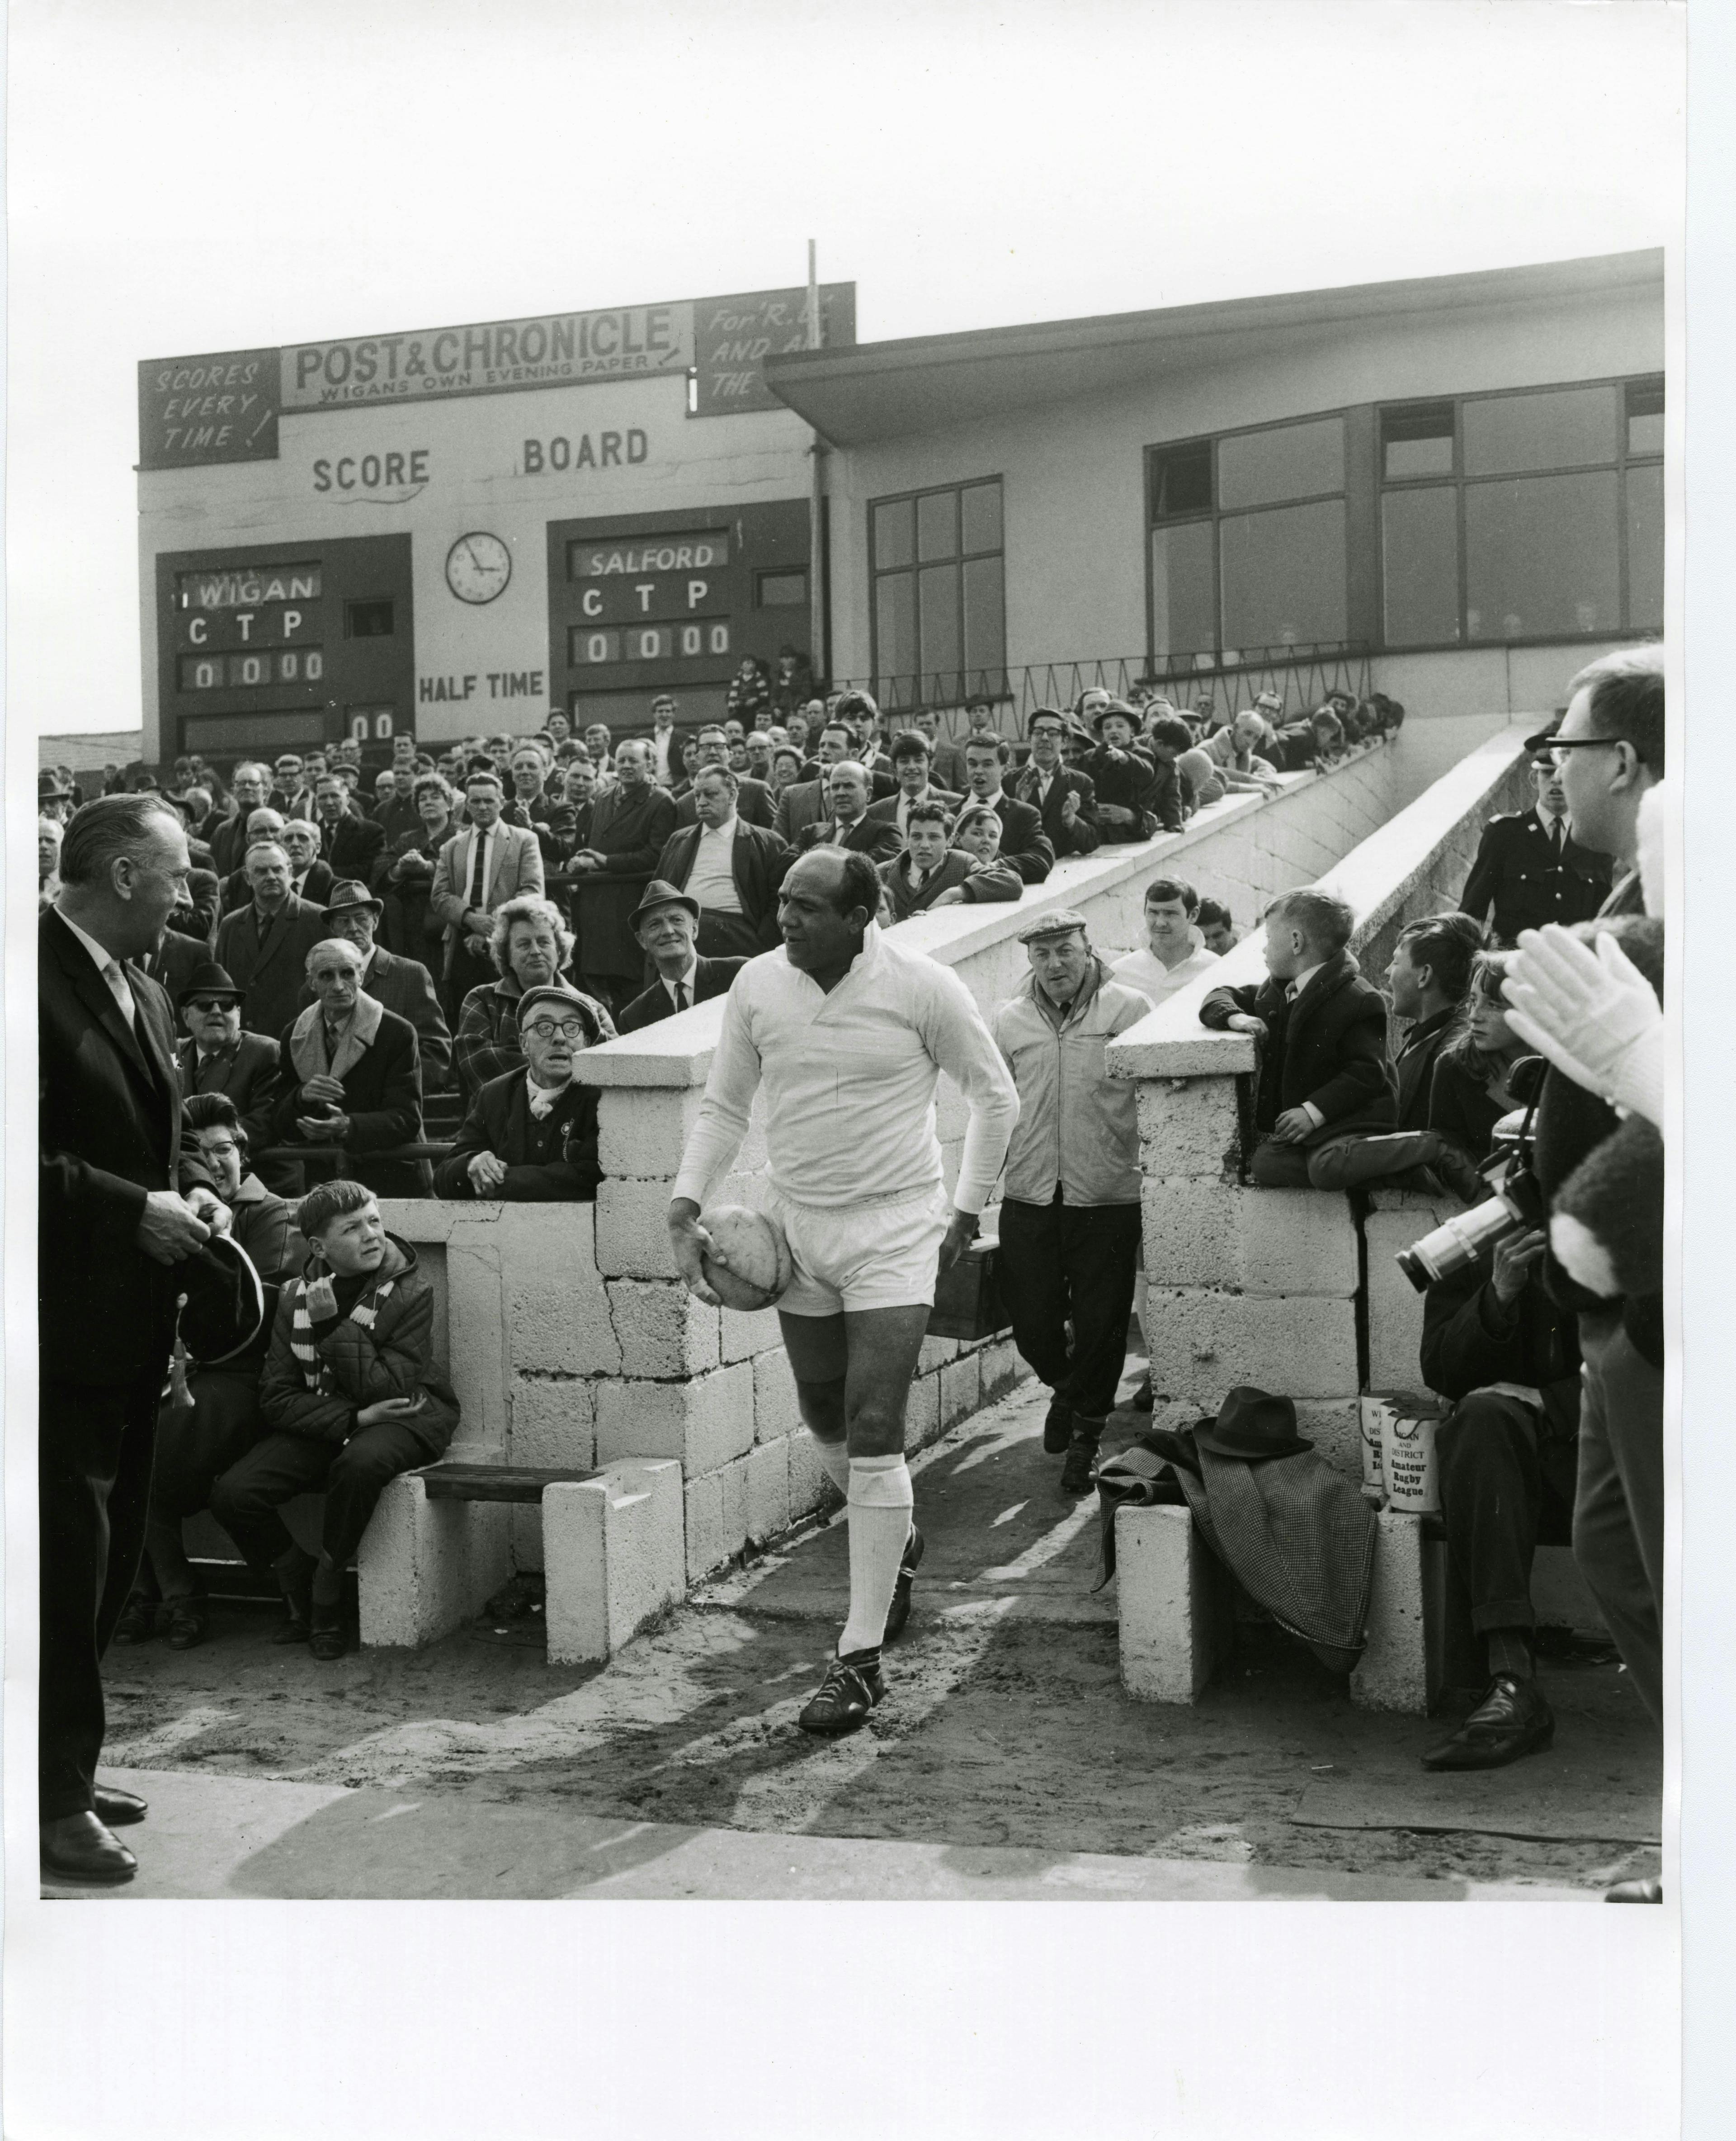 Football player Billy Boston exiting a building surrounded by fans during his last match for Wigan (Wigan vs. Salford, 1968)